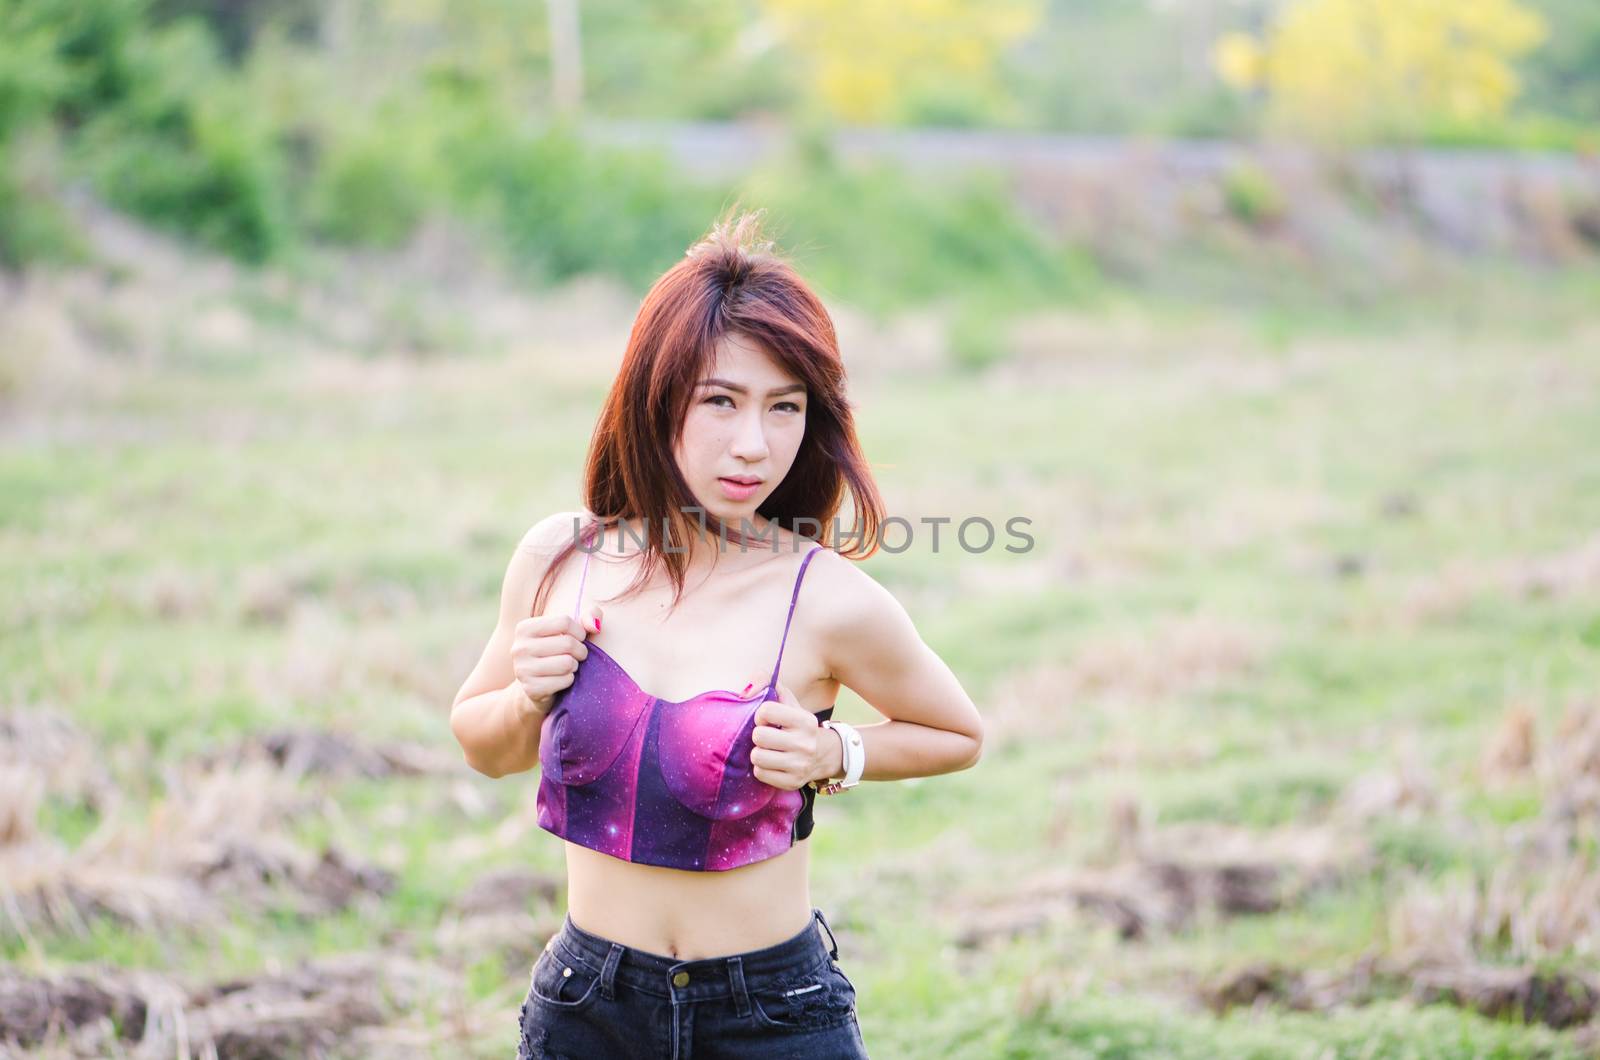 Portrait of charming woman, model is a asian girl.